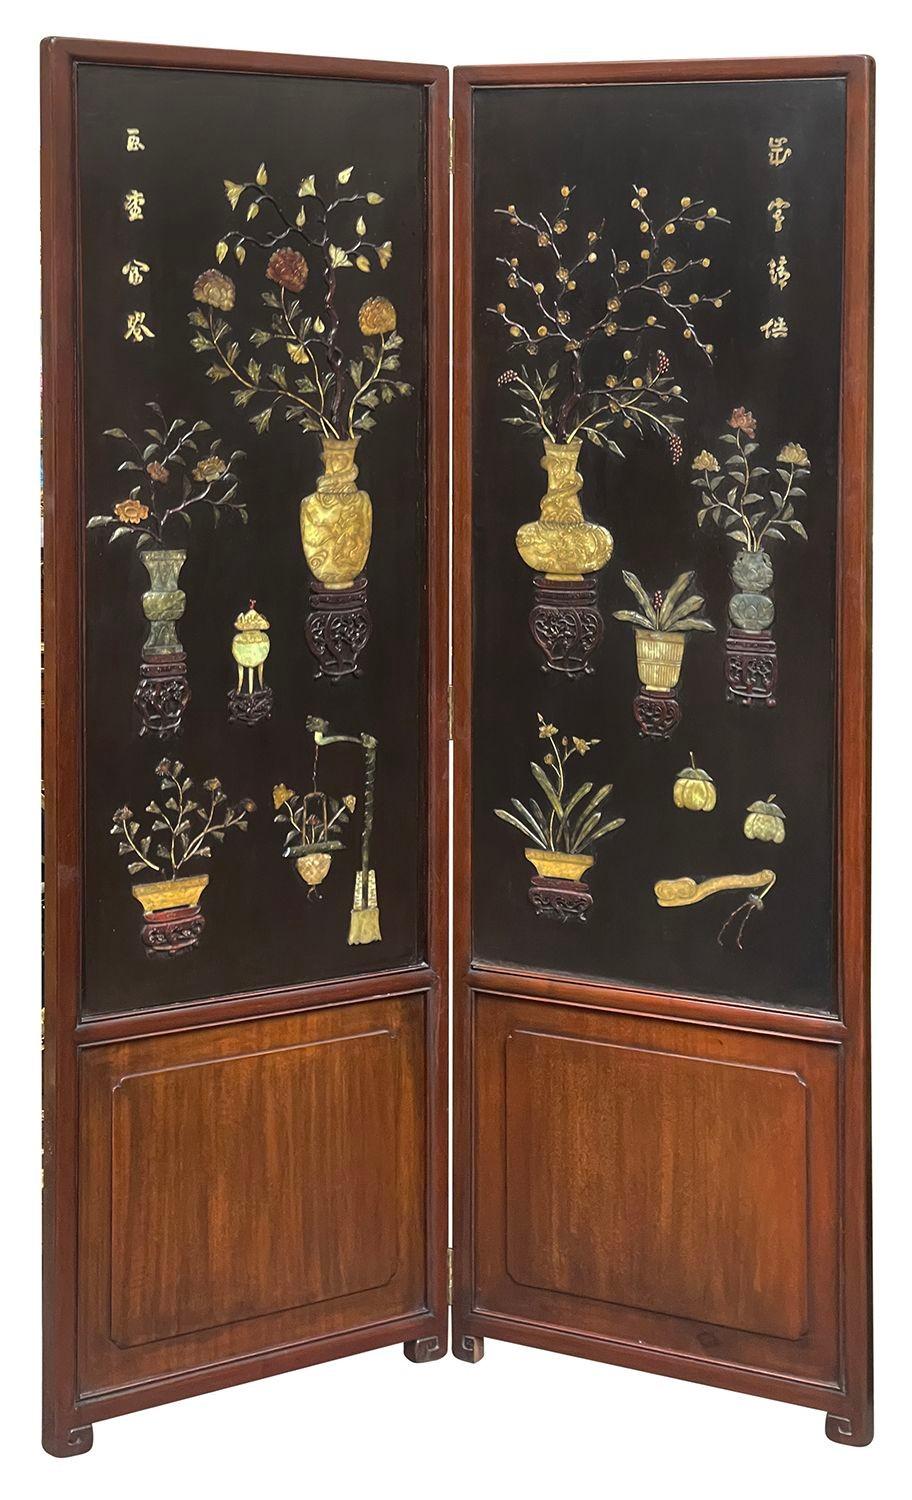 A very impressive and decorative 19th Century Chinese 8 fold screen. Each panel depicting hand carved Soap stone classical vases, stands and flowers set on black lacquer ground and mounted in hardwood frames.

Batch 78